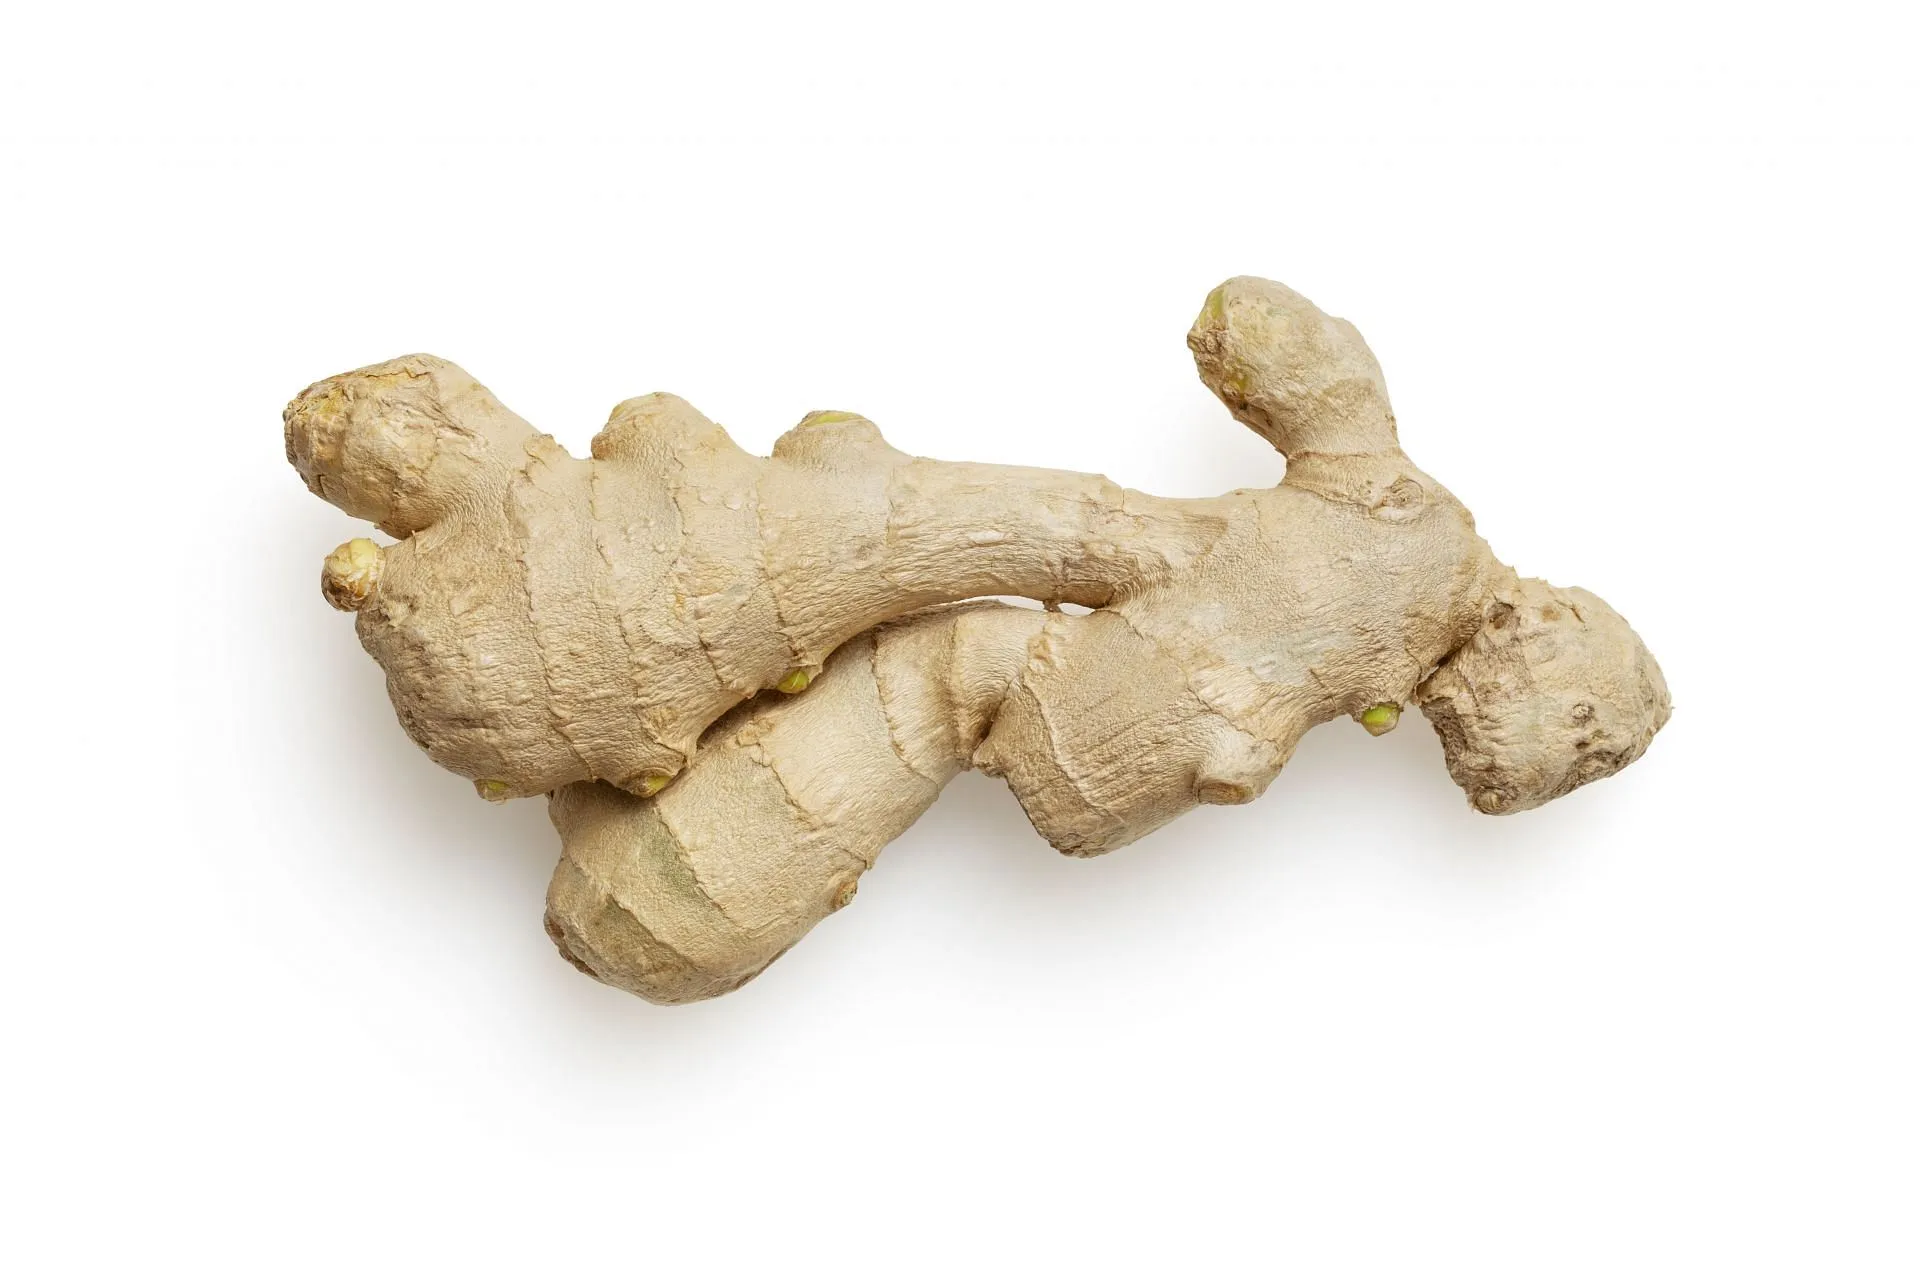 Dried ginger may help with weight loss (Image via Unsplash/ Mockup Graphics)